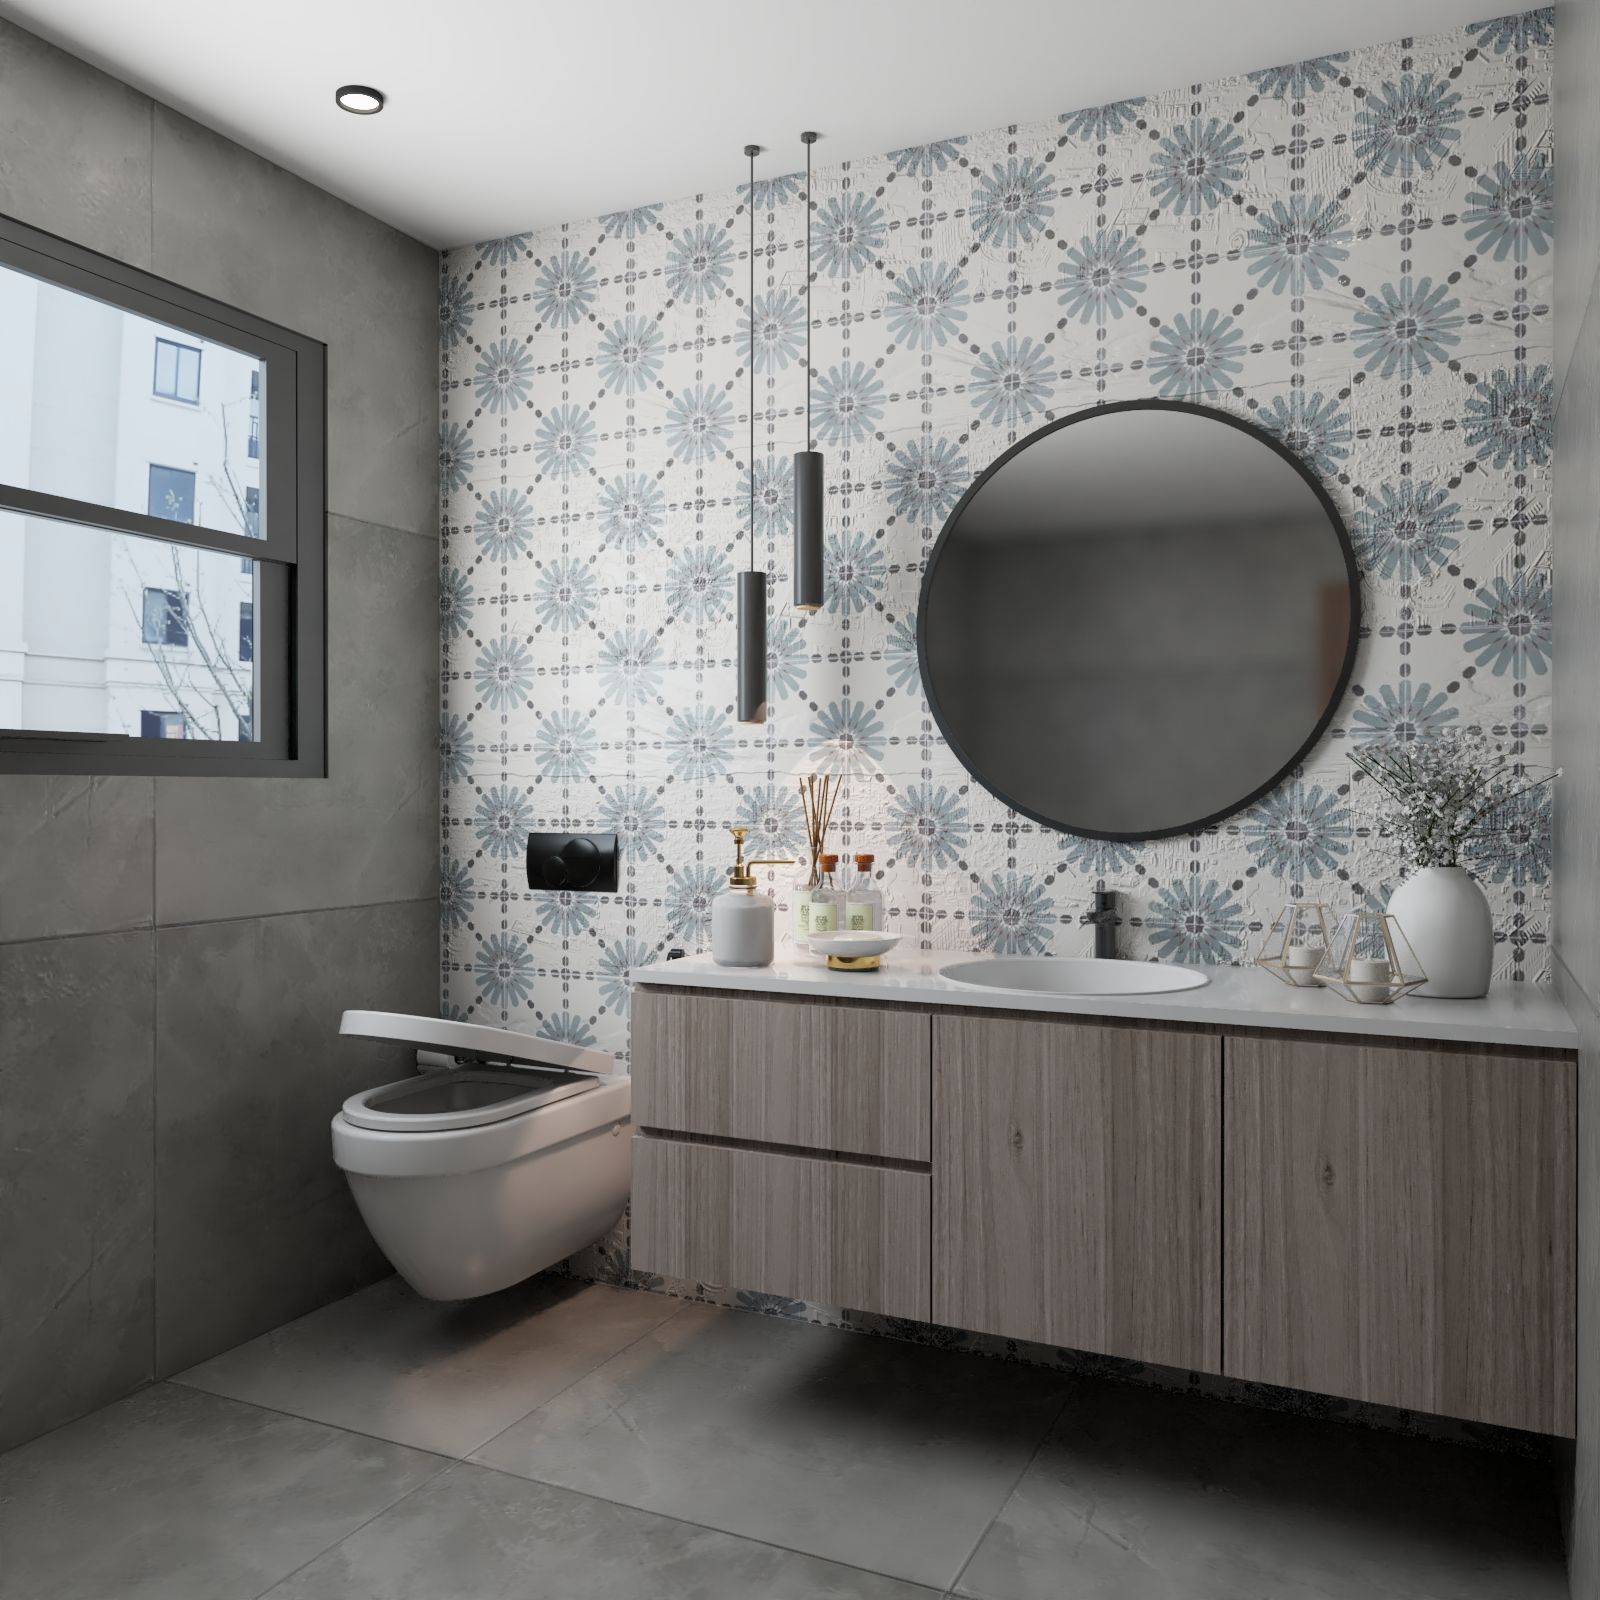 Contemporary Grey-White And Blue Bathroom Design With Wooden Vanity Unit